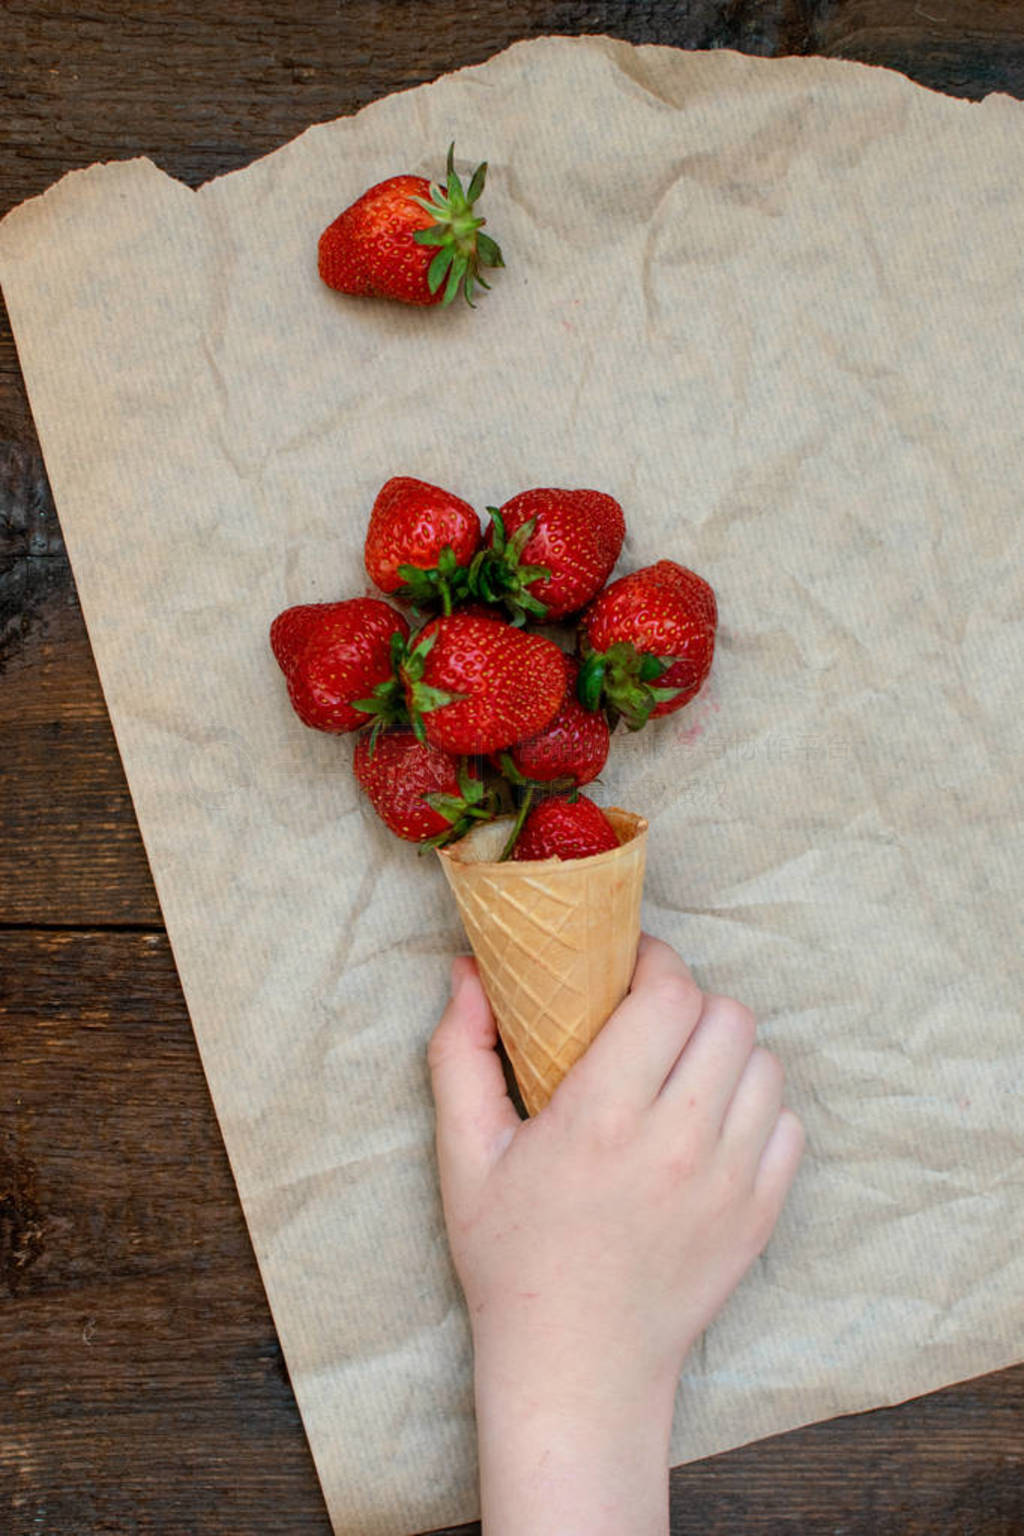 Children's hand takes strawberries in ice cream cone on natural